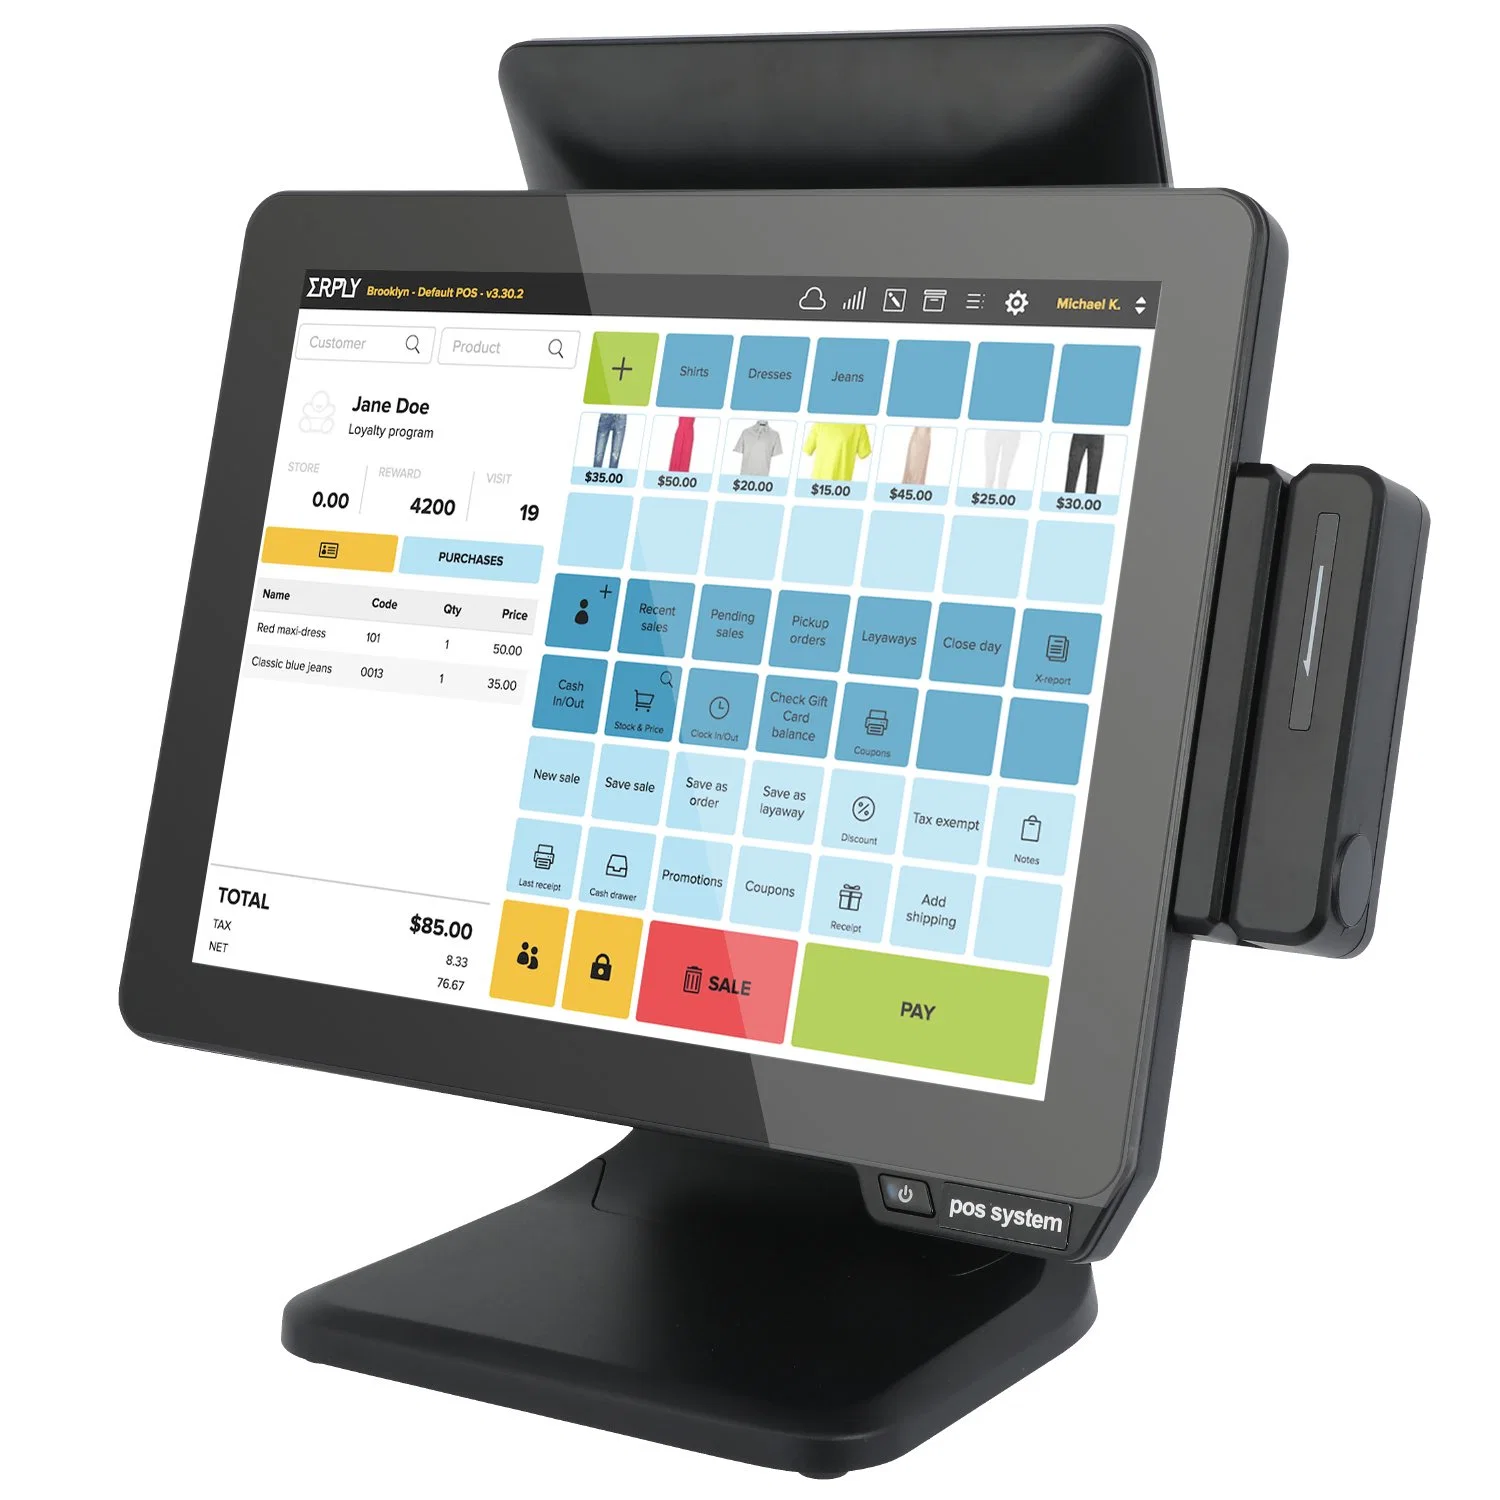 Smart Design Touch Point of Sales Restaurant Point of Sale System(e)